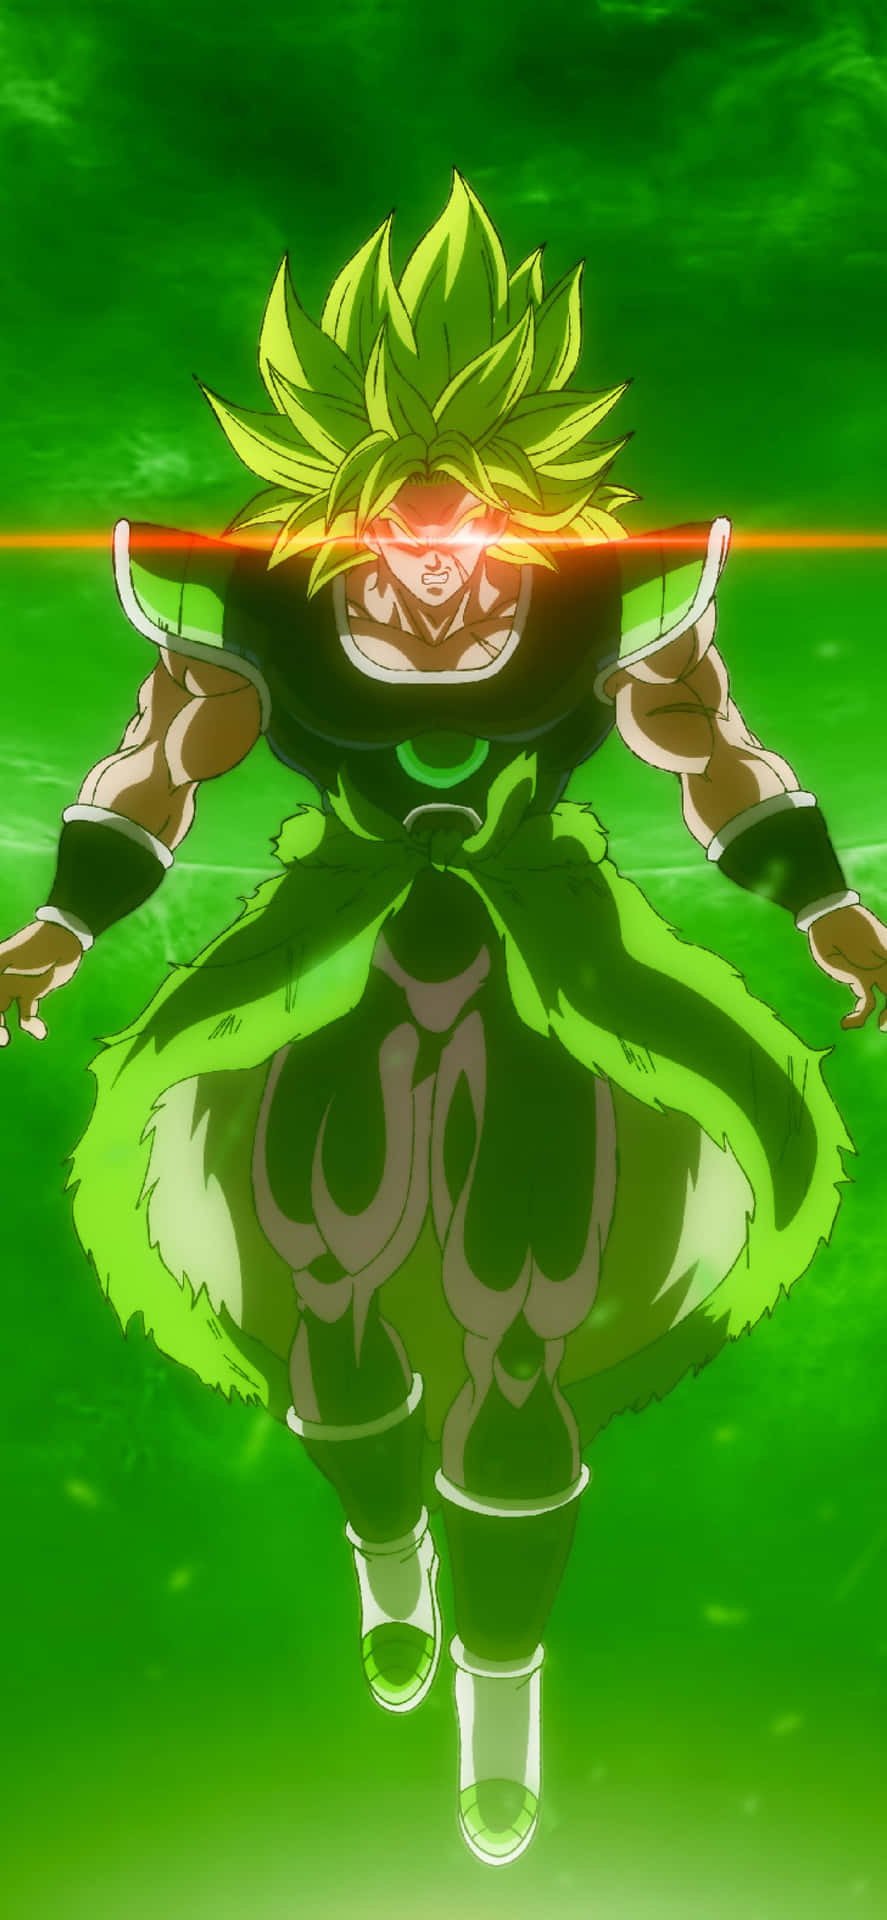 Show Off Your Style With Broly iPhone Wallpaper